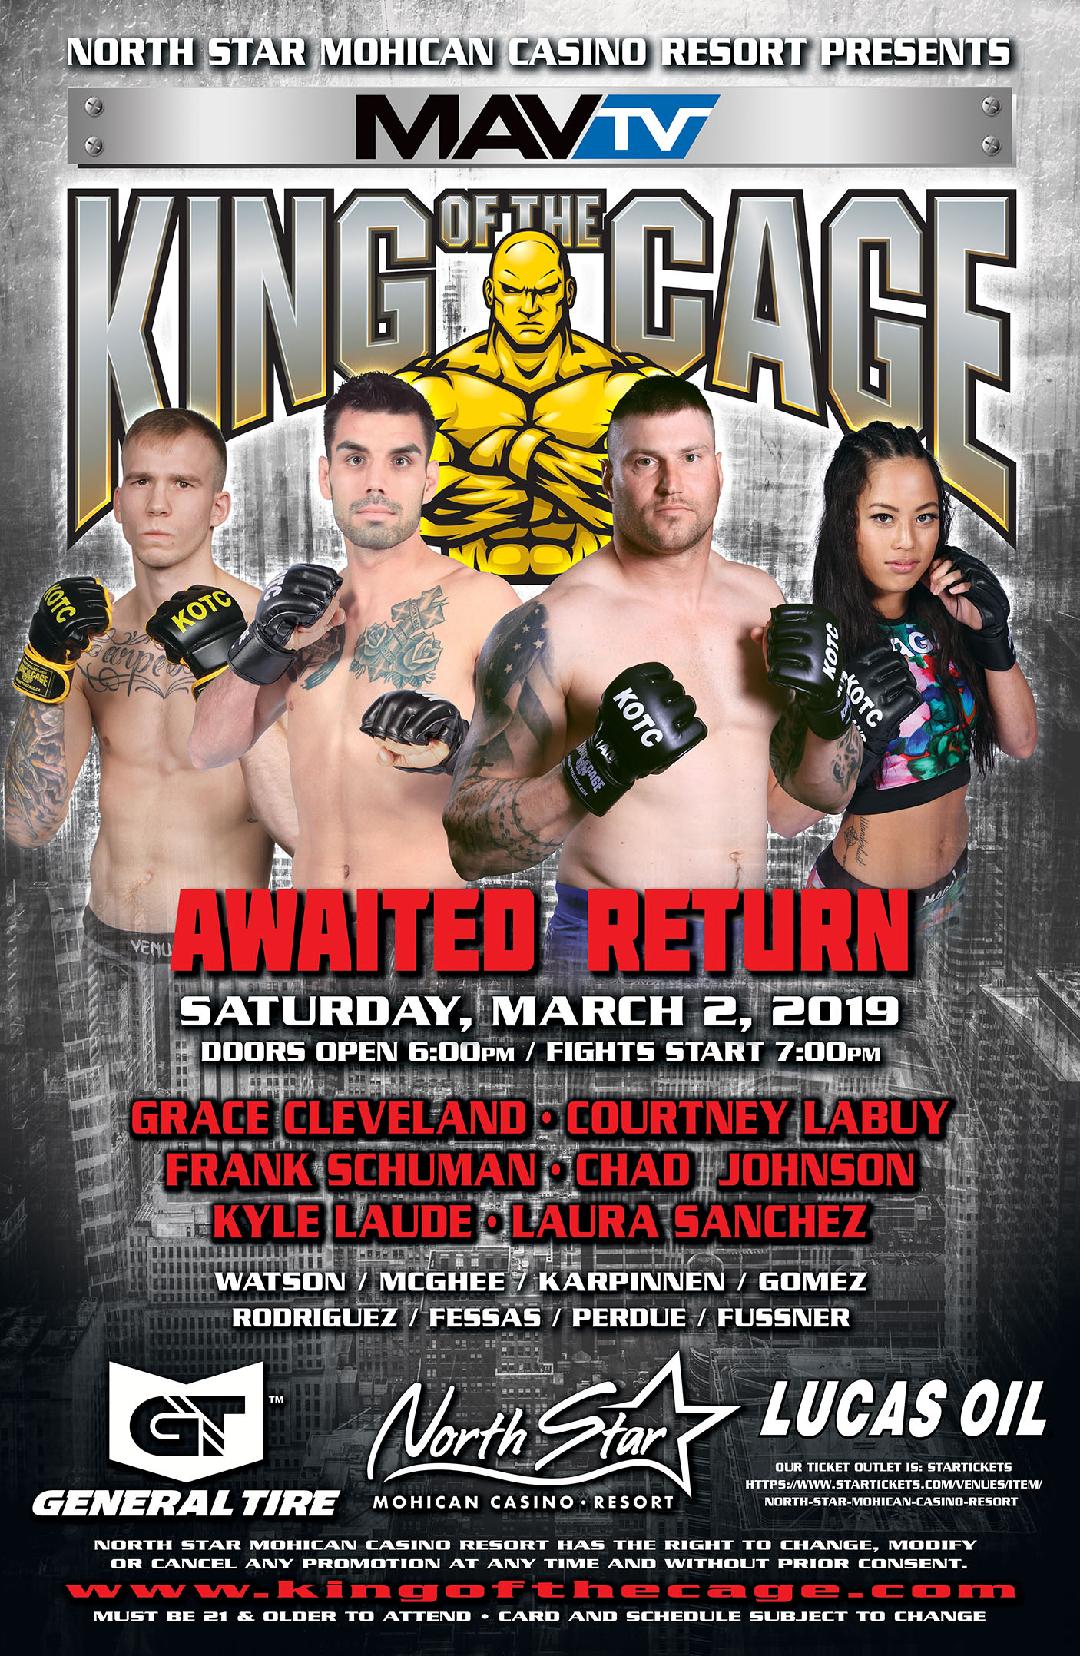 King of the Cage Debuts at North Star Mohican Casino Resort on March 2 with “AWAITED RETURN”